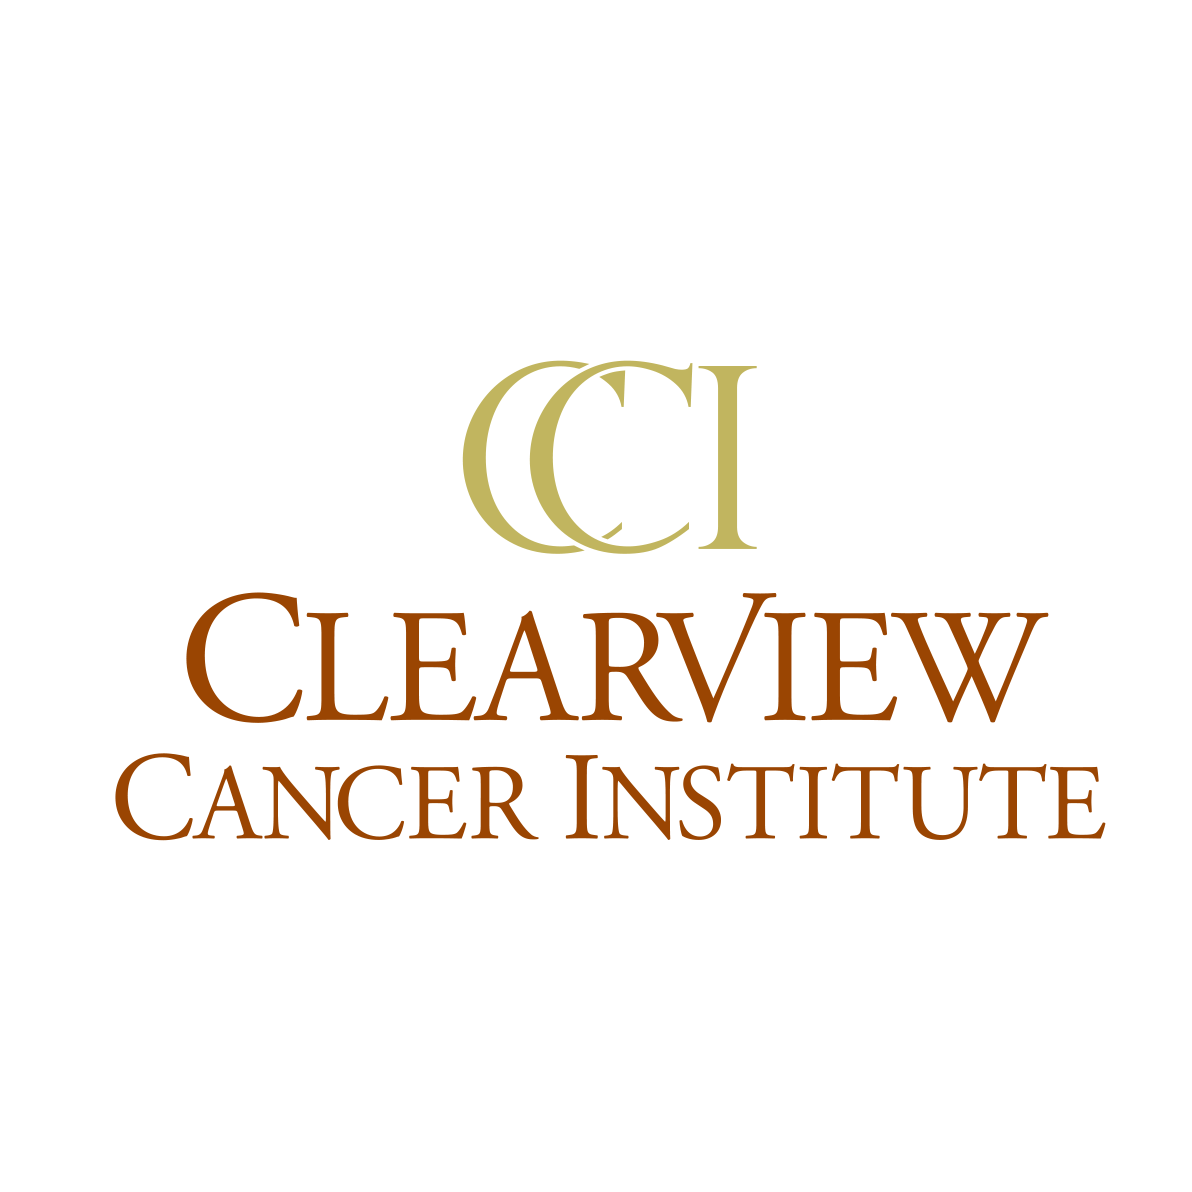 Clearview Cancer Institute Logo | Image credit: mapquest.com